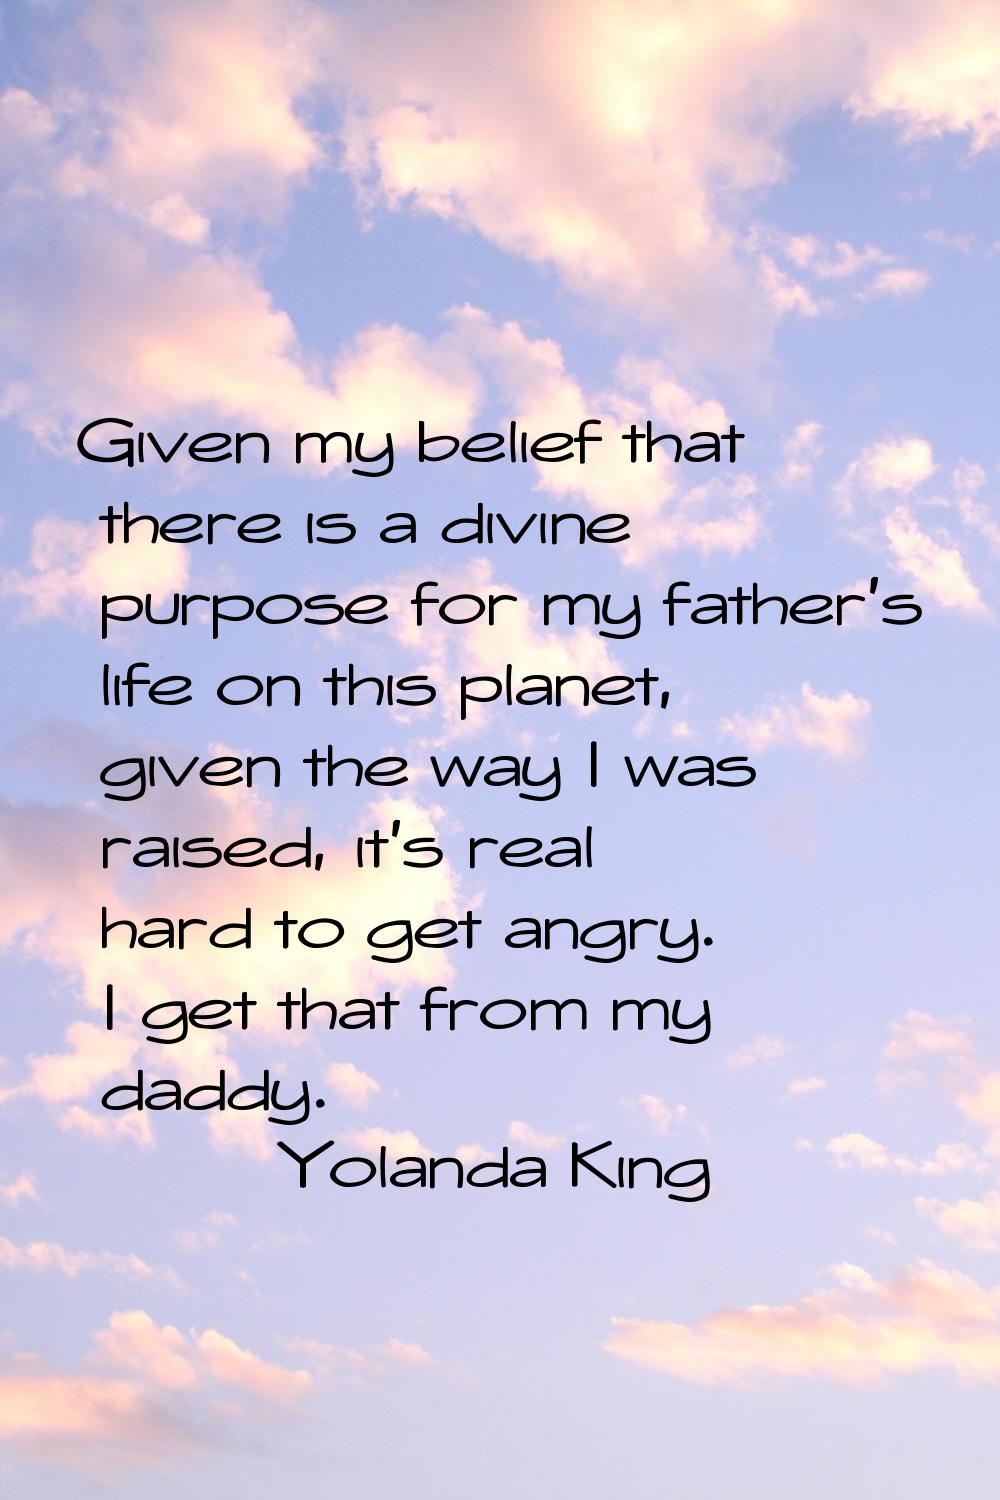 Given my belief that there is a divine purpose for my father's life on this planet, given the way I